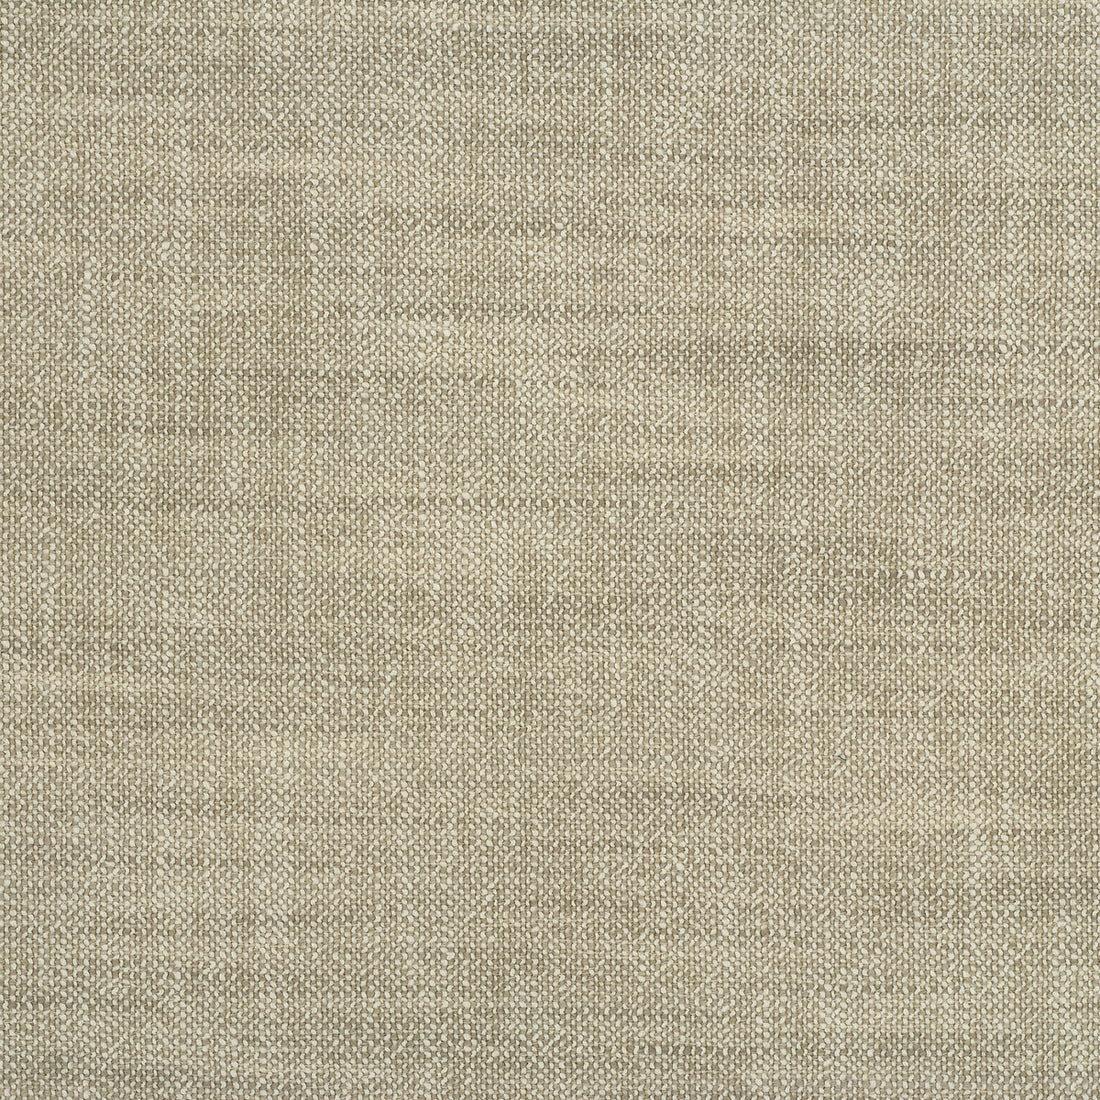 Elodie Texture fabric in linen color - pattern 8017143.116.0 - by Brunschwig &amp; Fils